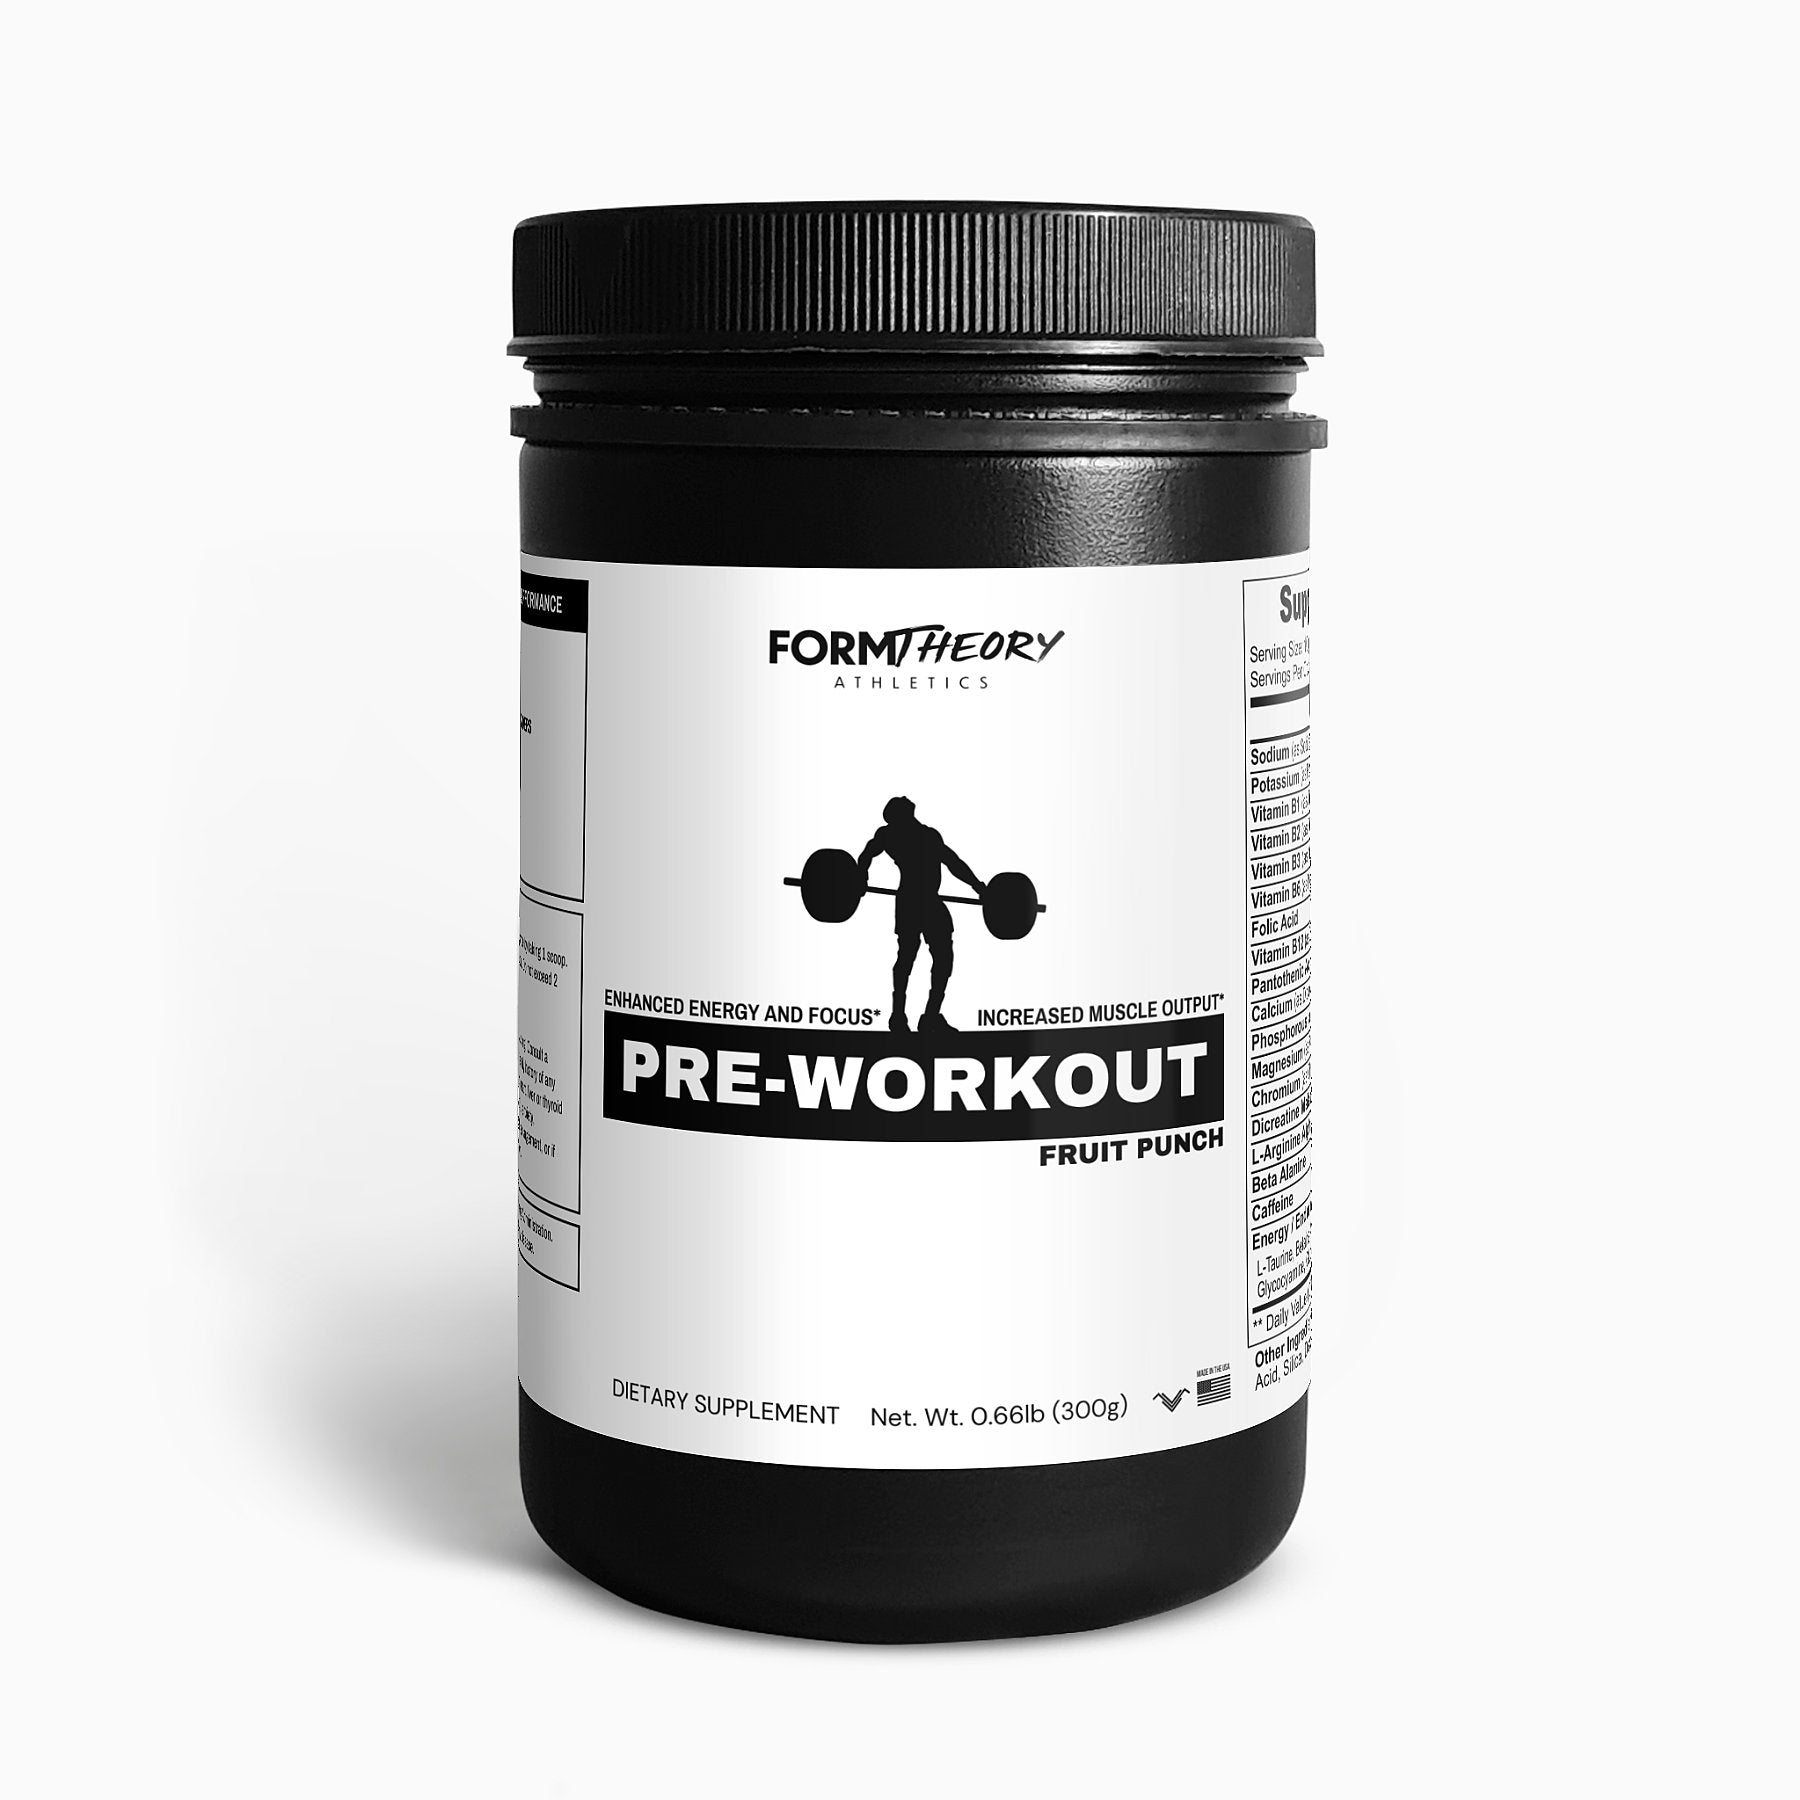 Pre-Workout - FormTheory Athletics